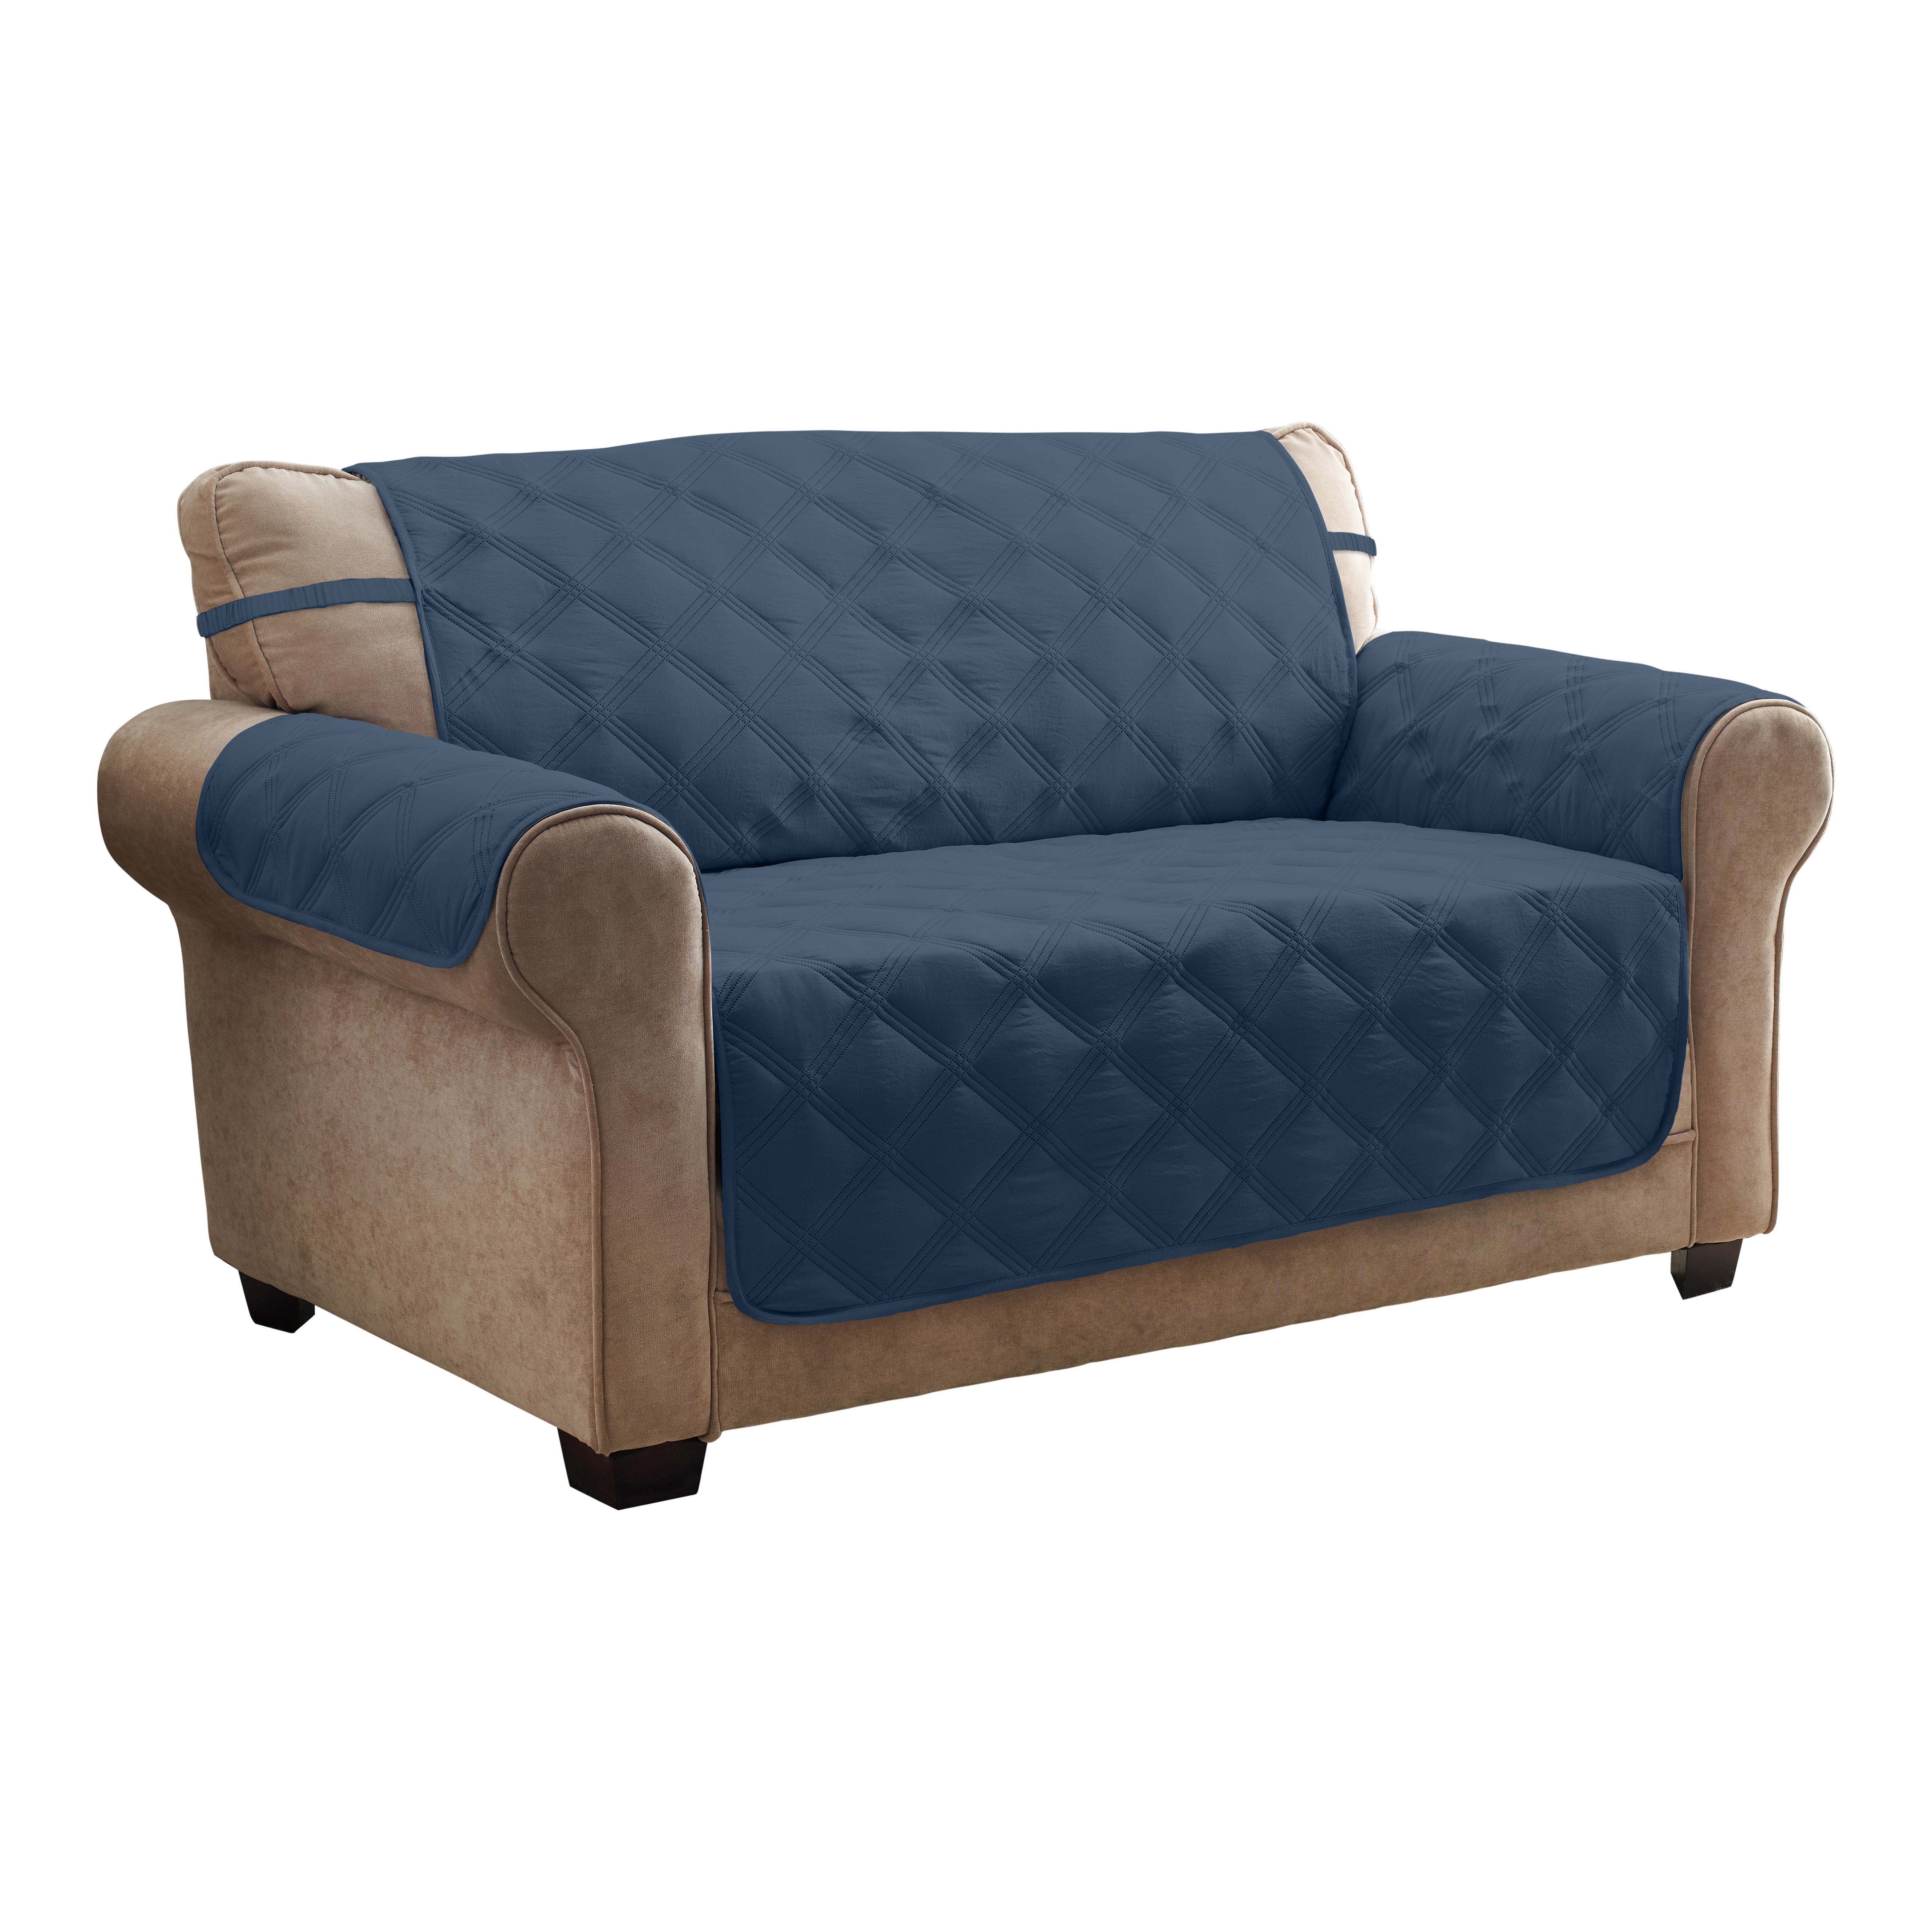 Innovative Textile Solutions 1-piece Hampton Diamond Secure Fit Loveseat Furniture Cover, Blue - image 2 of 7